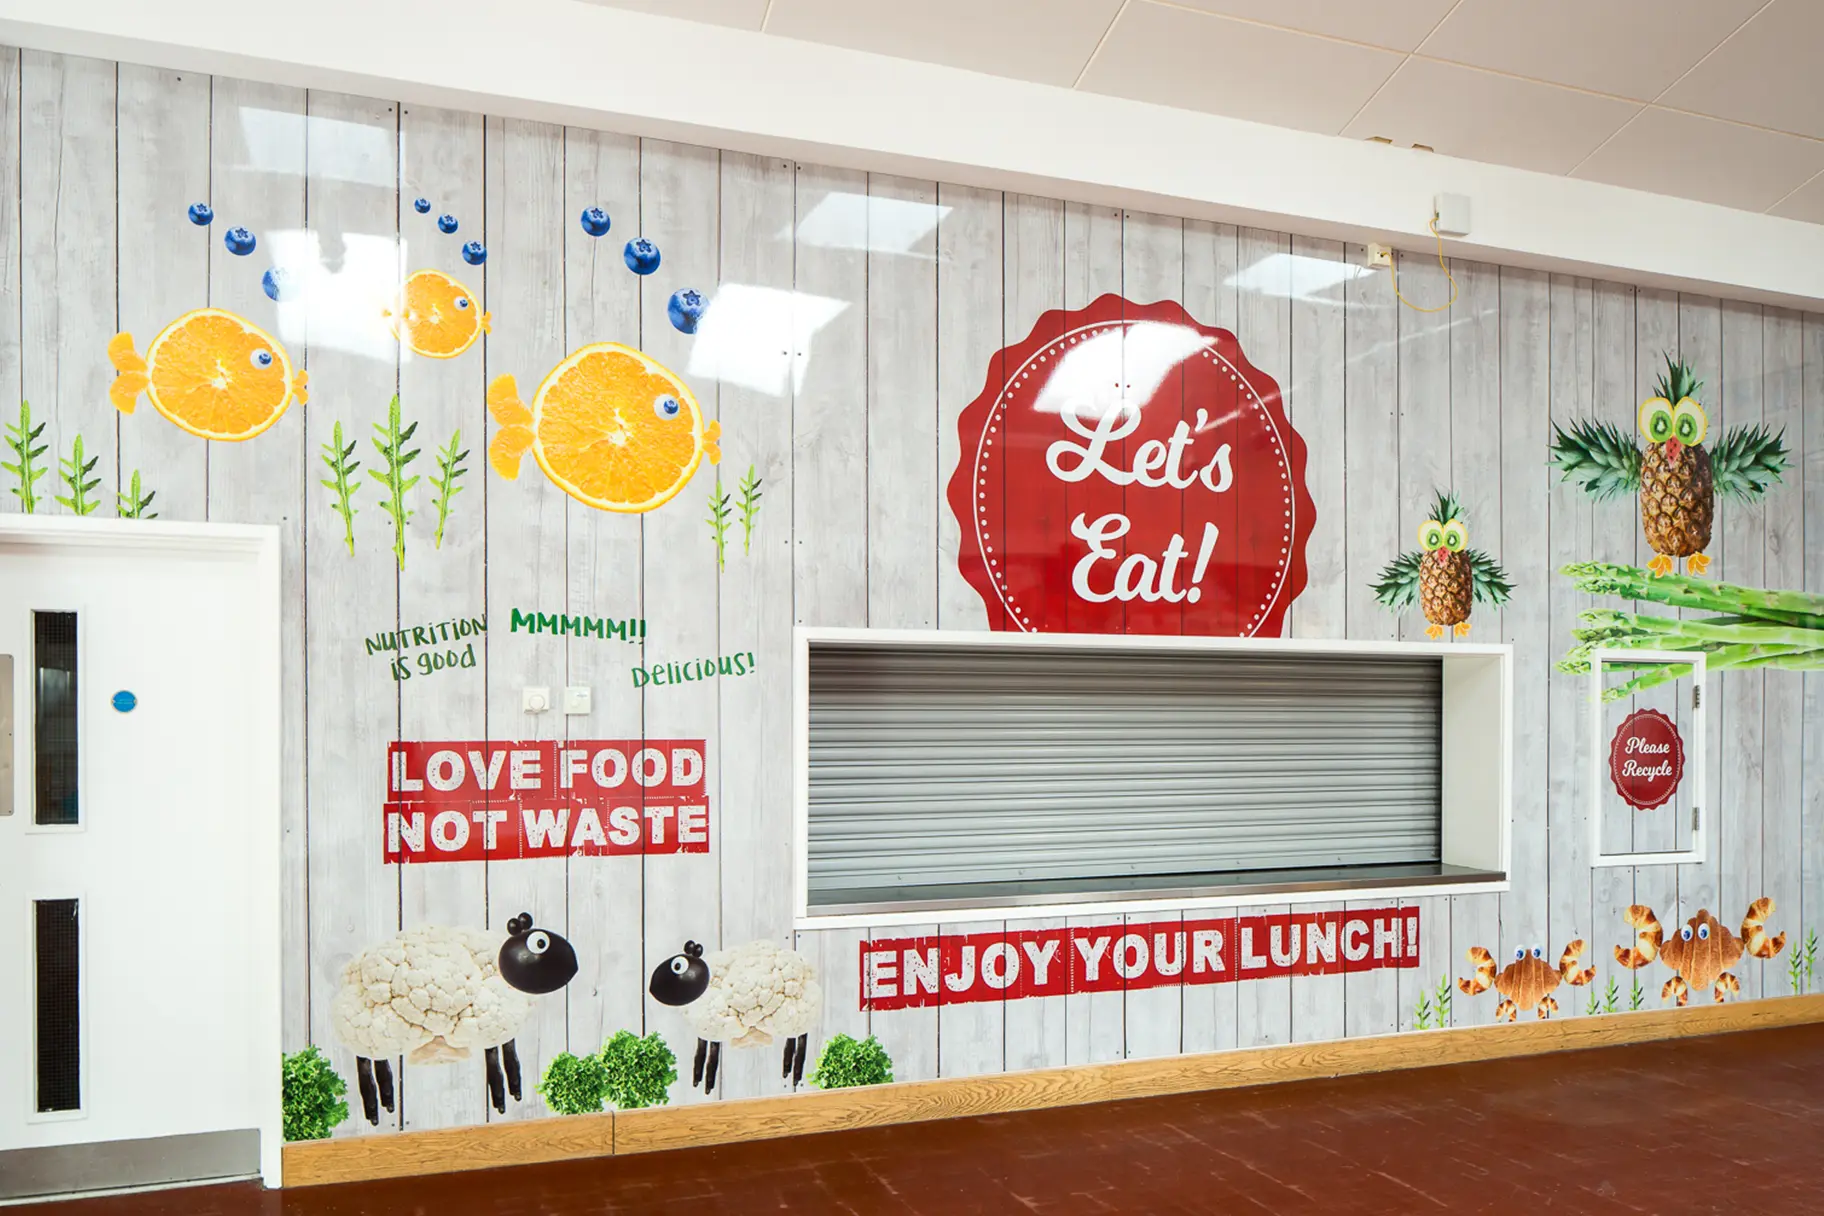 West Acton School Healthy eating canteen wall art